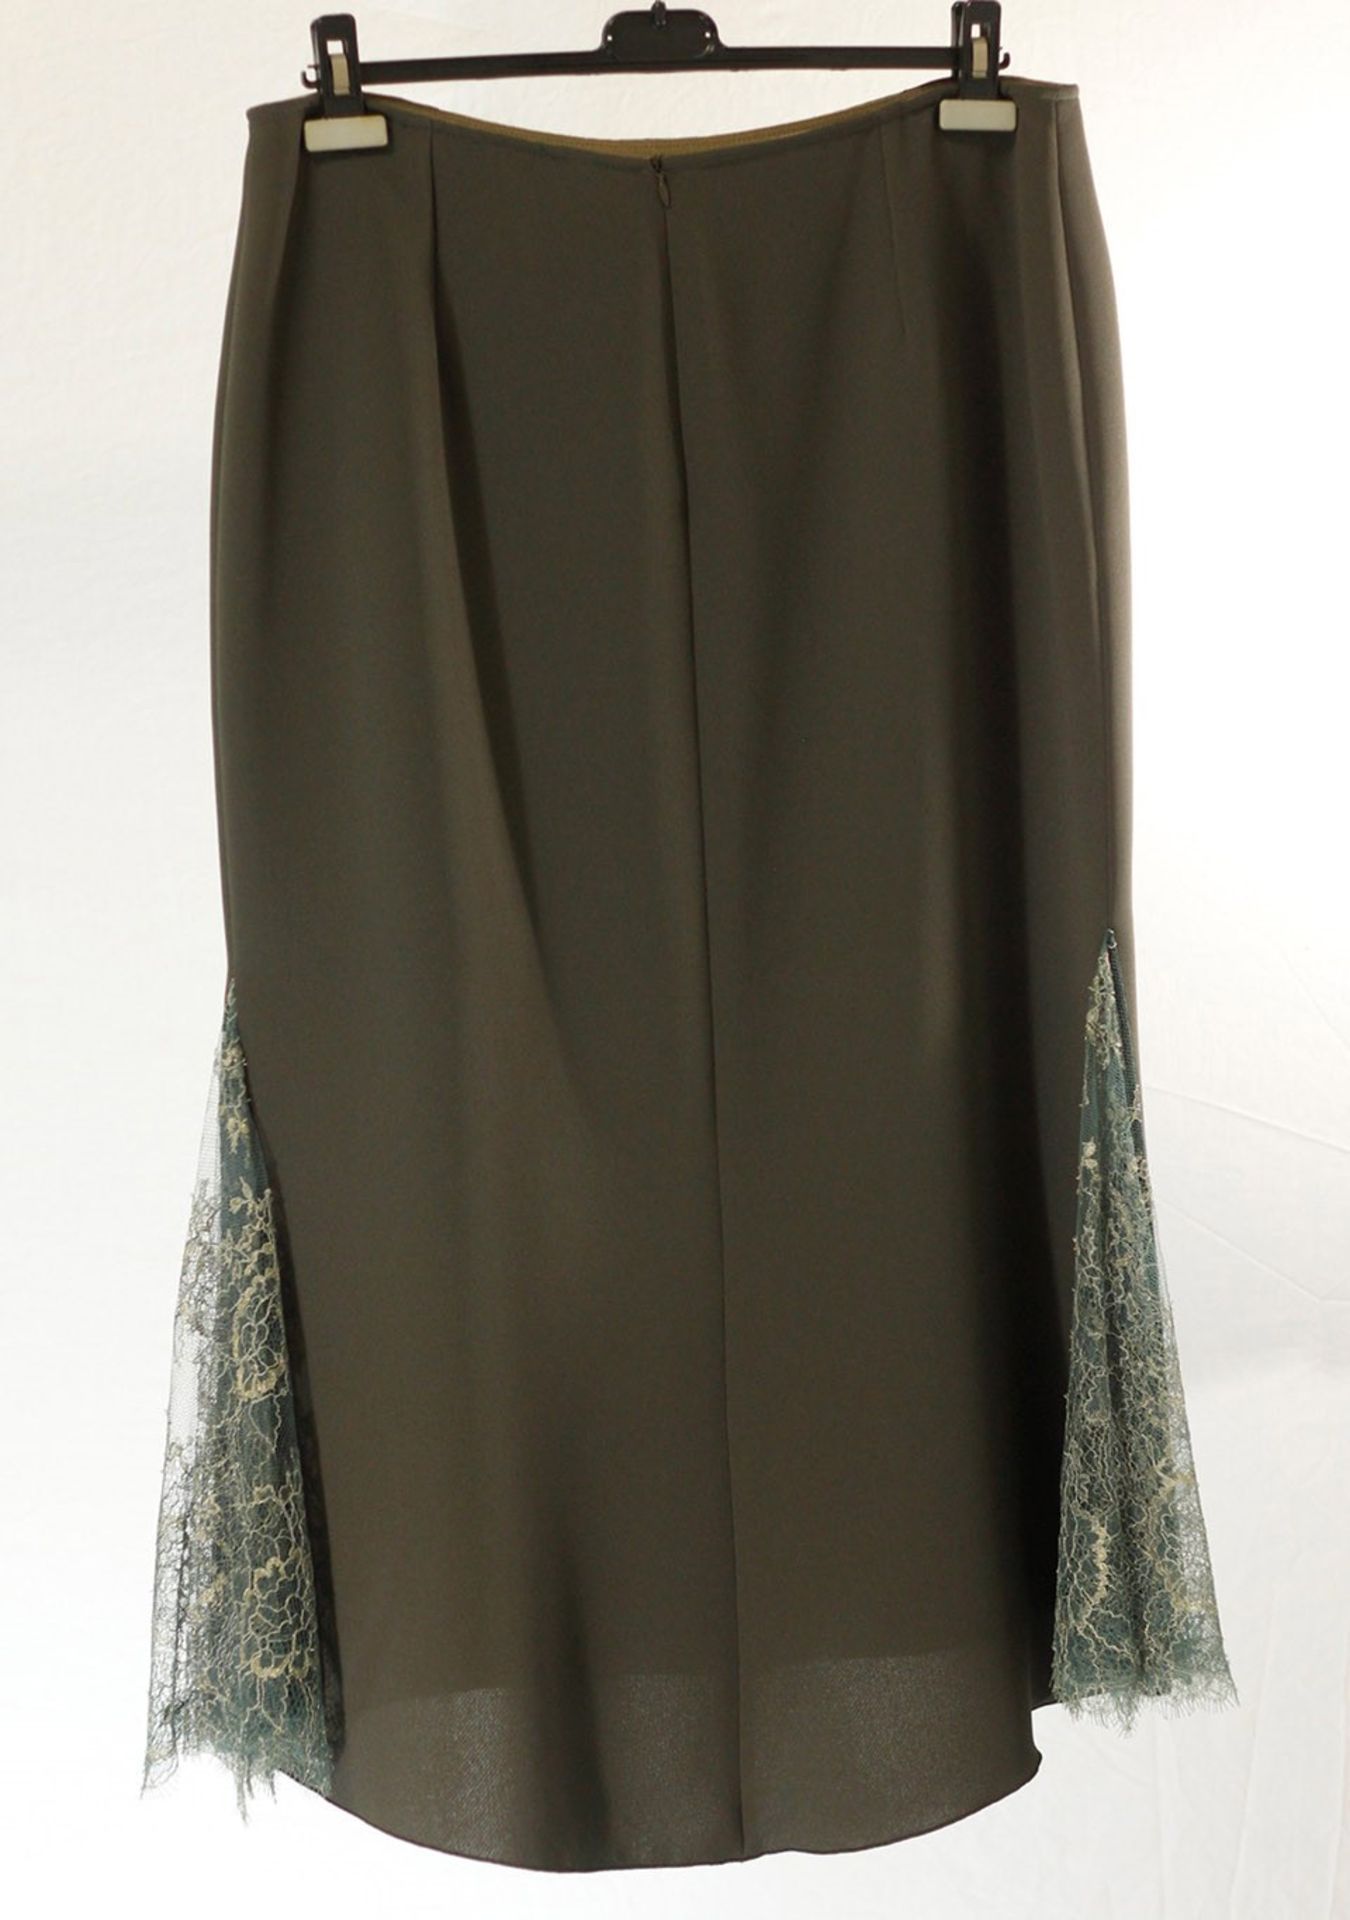 1 x Anne Belin Green Skirt - From A High End Clothing Boutique In The Netherlands - Image 6 of 8